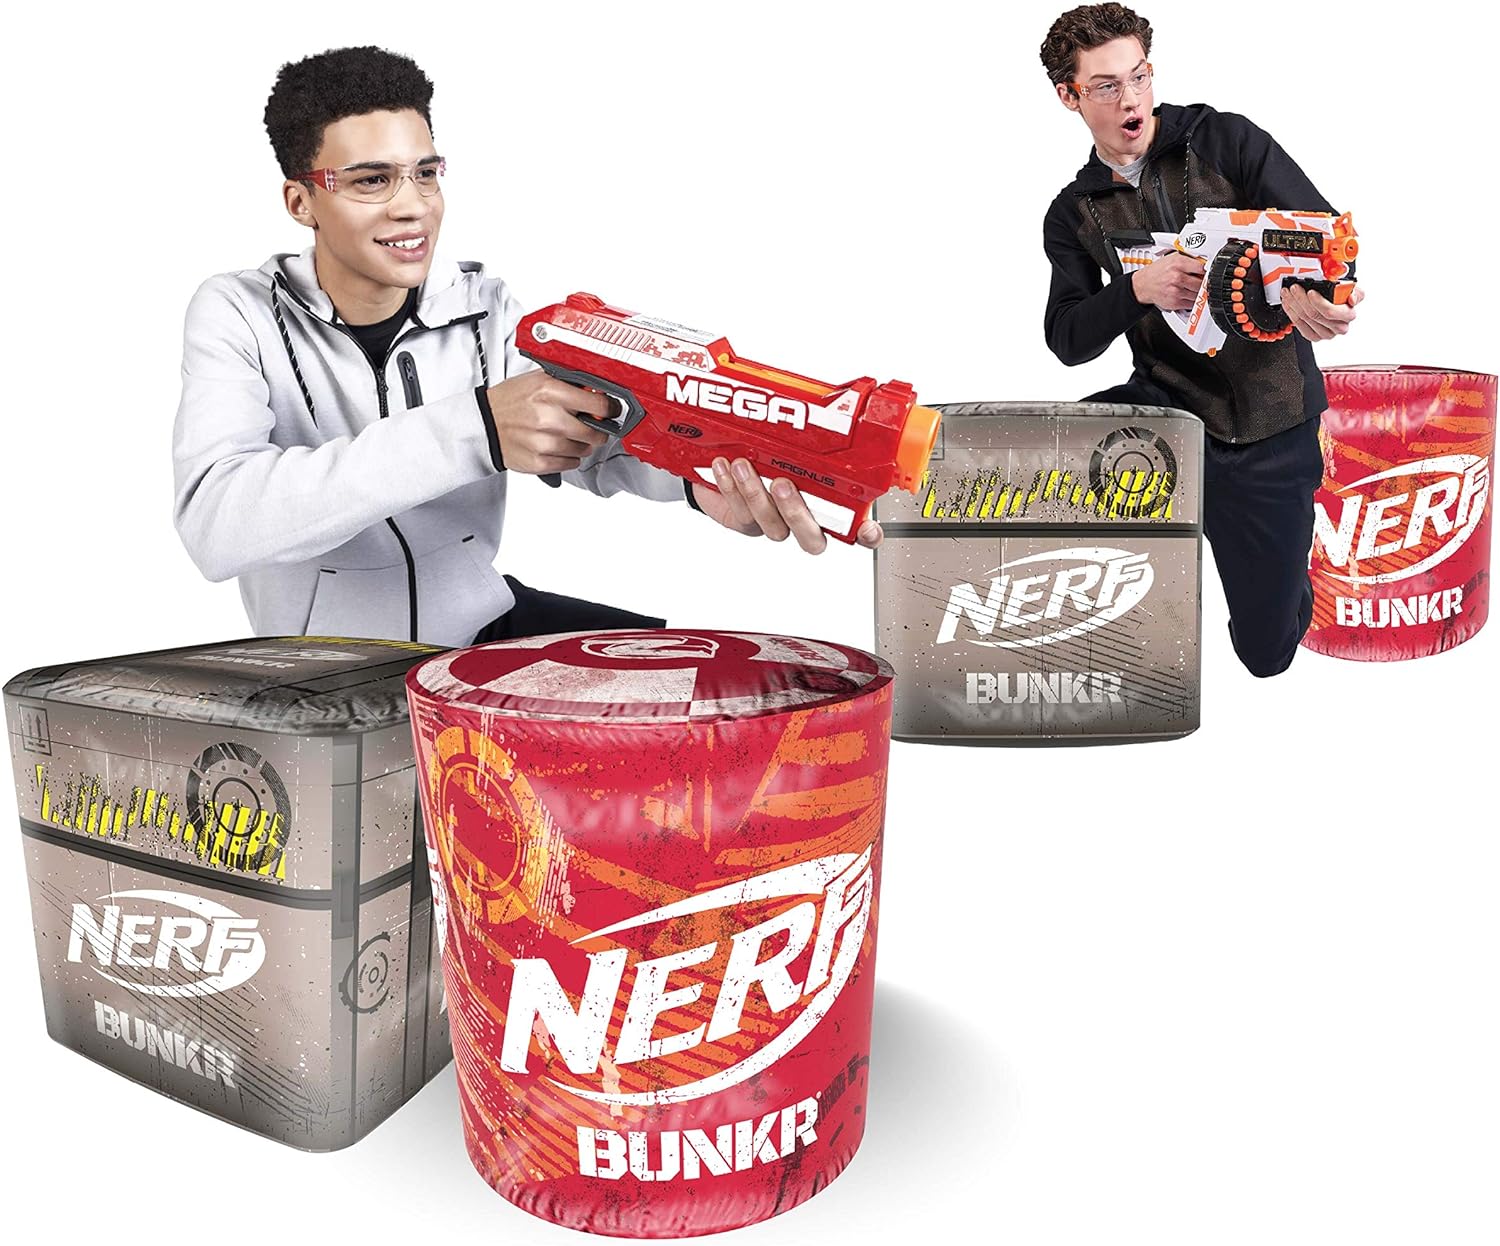 Durable nerf inflatable stackers. Great for a nerf battle. Can be used to hide behind for smaller children or can be stacked. We used for a birthday party and kids had a blast. Definitely recommend.